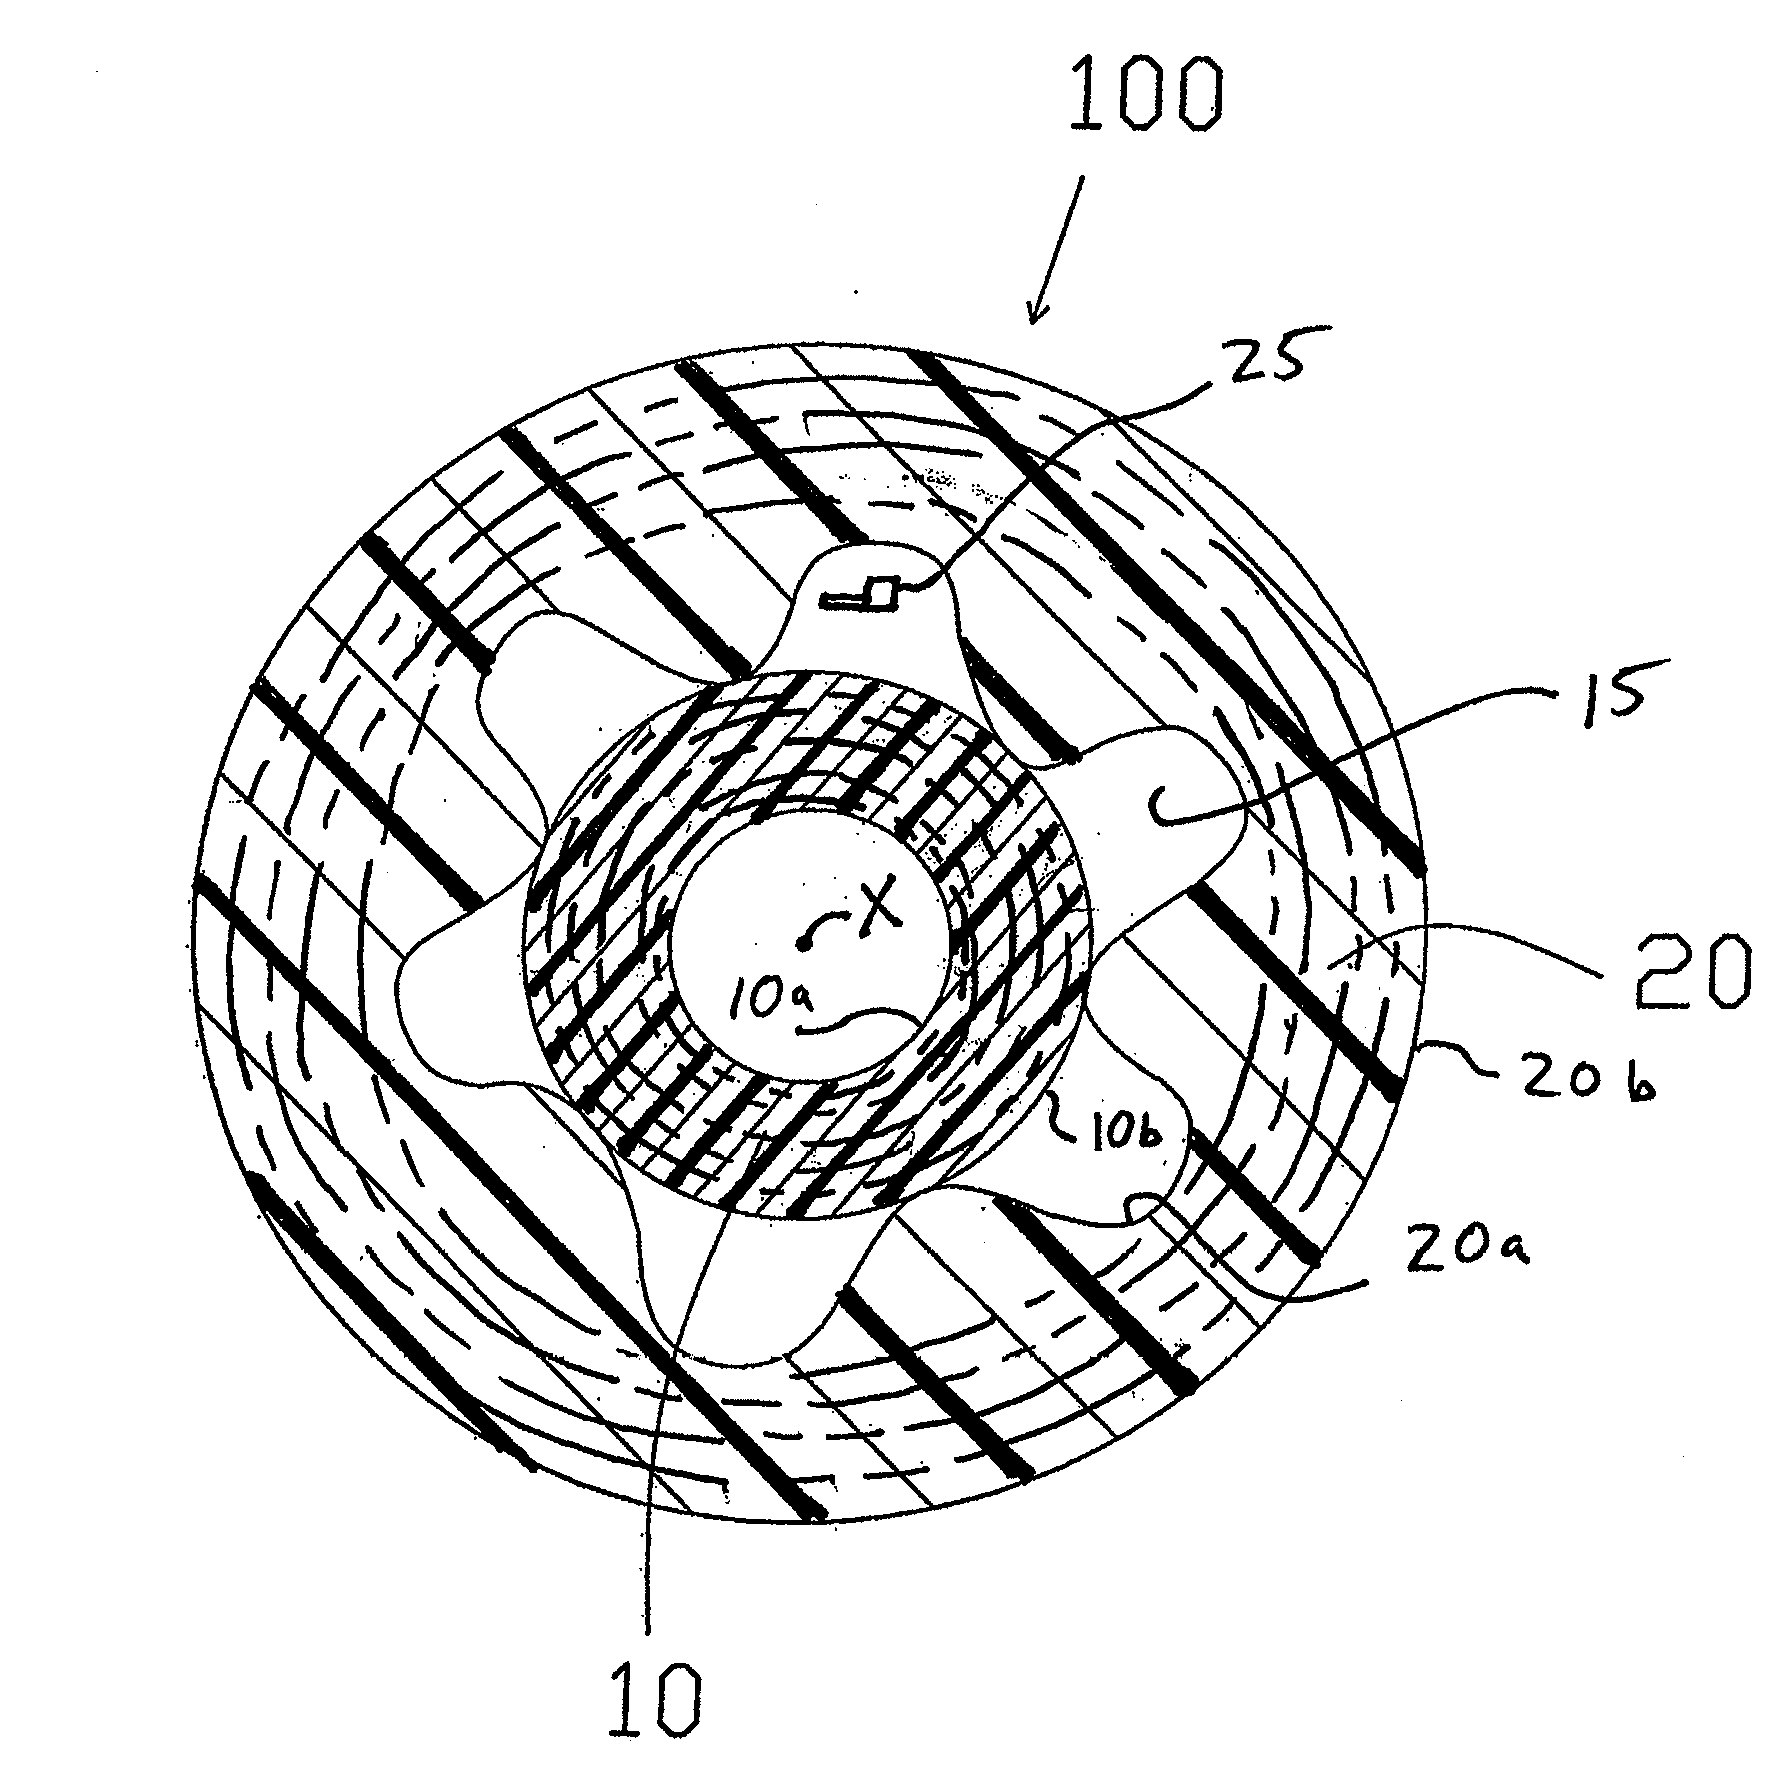 Dual-containment pipe containing fluoropolymer